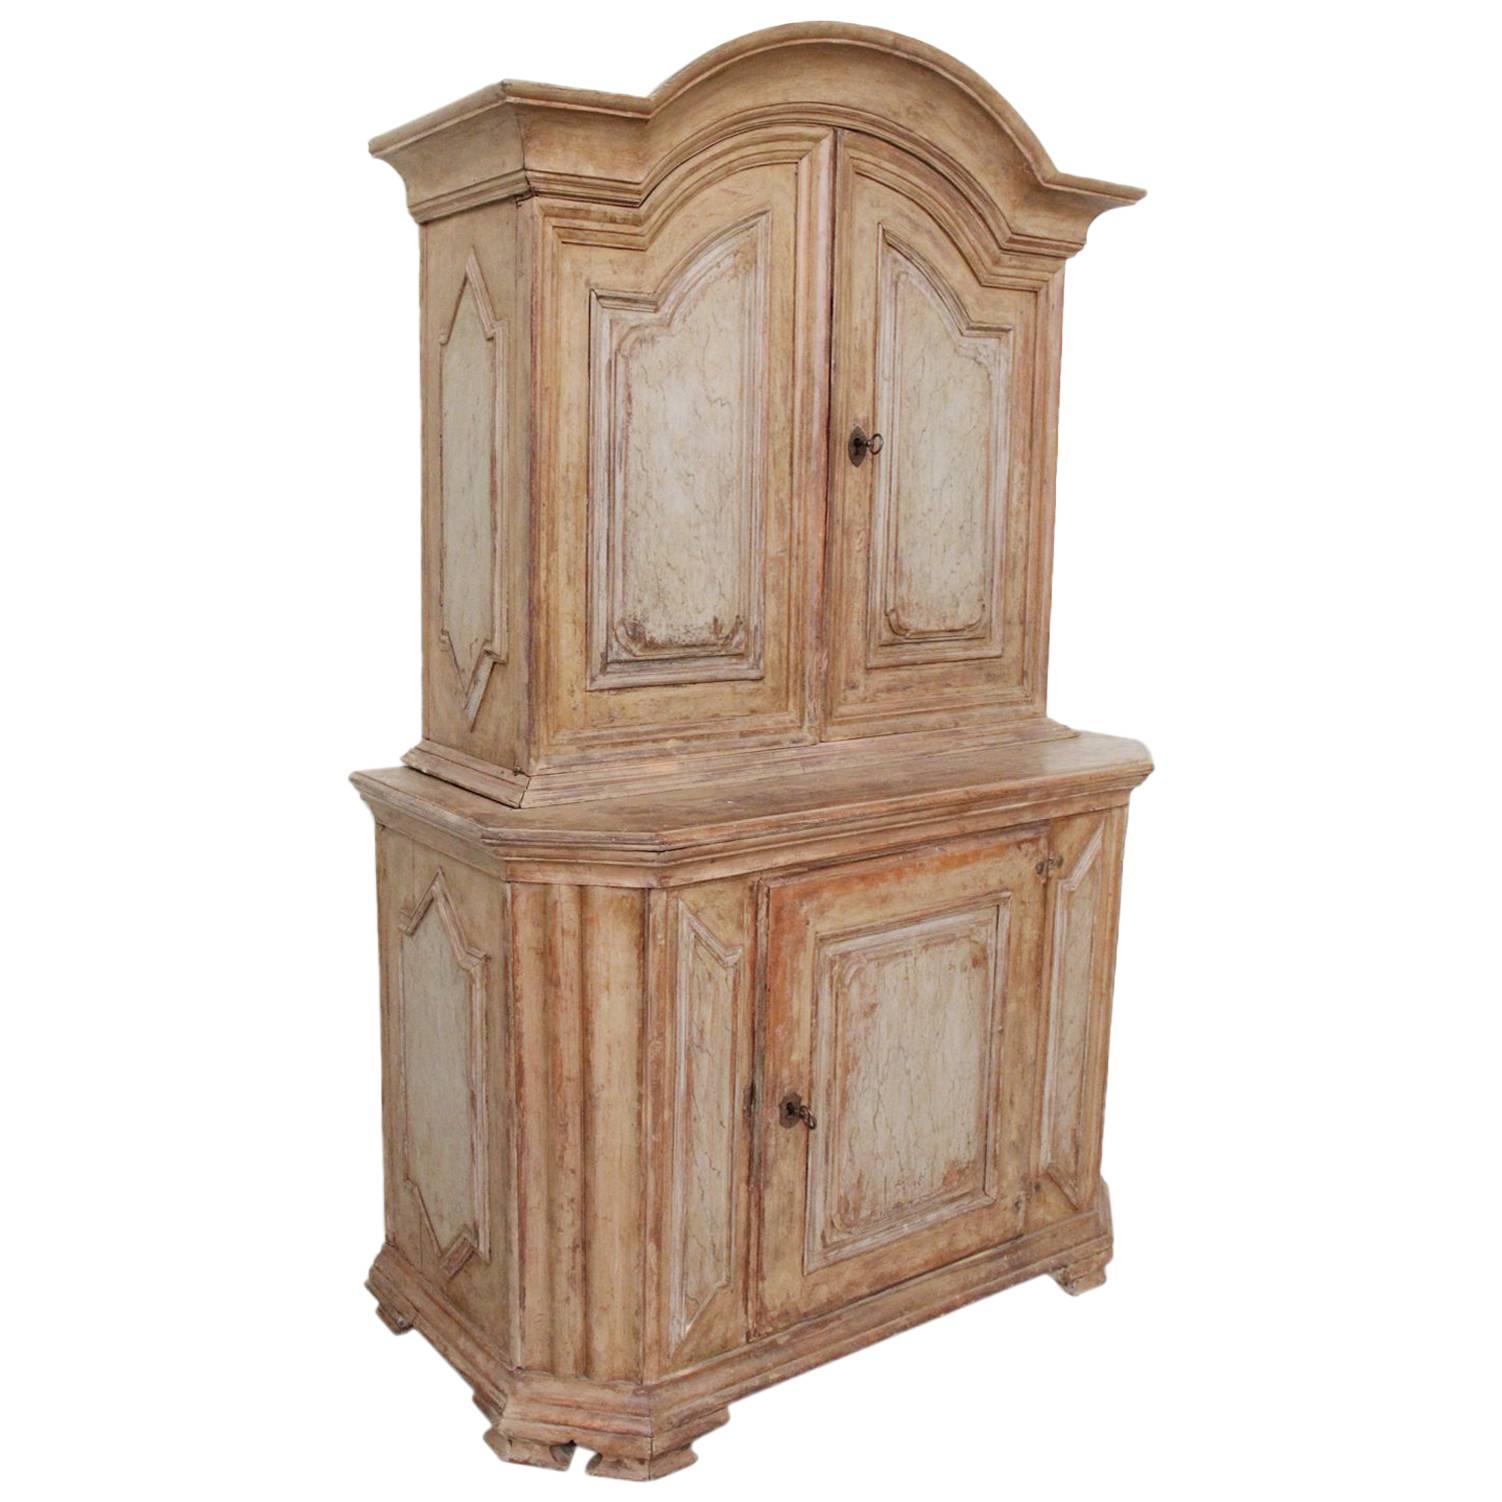 A rare 18th century Swedish Baroque period, circa 1720, two-part cabinet in original, untouched paint with arched cornice and richly carved, raised panel doors. Original working locks and keys. There is a note in one of the drawers dated 1717,